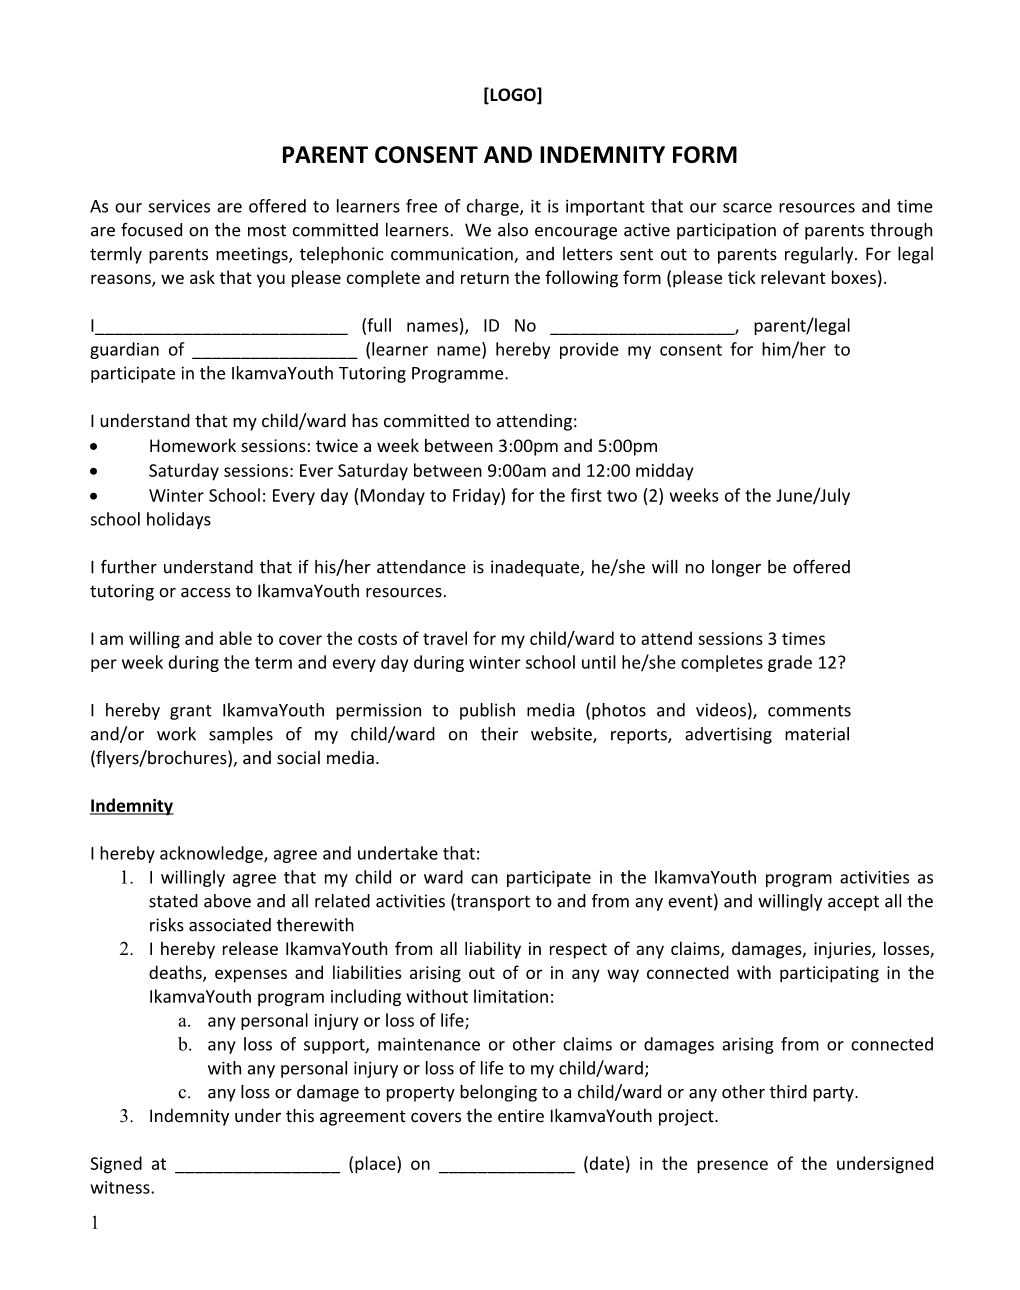 Parent Consent and Indemnity Form